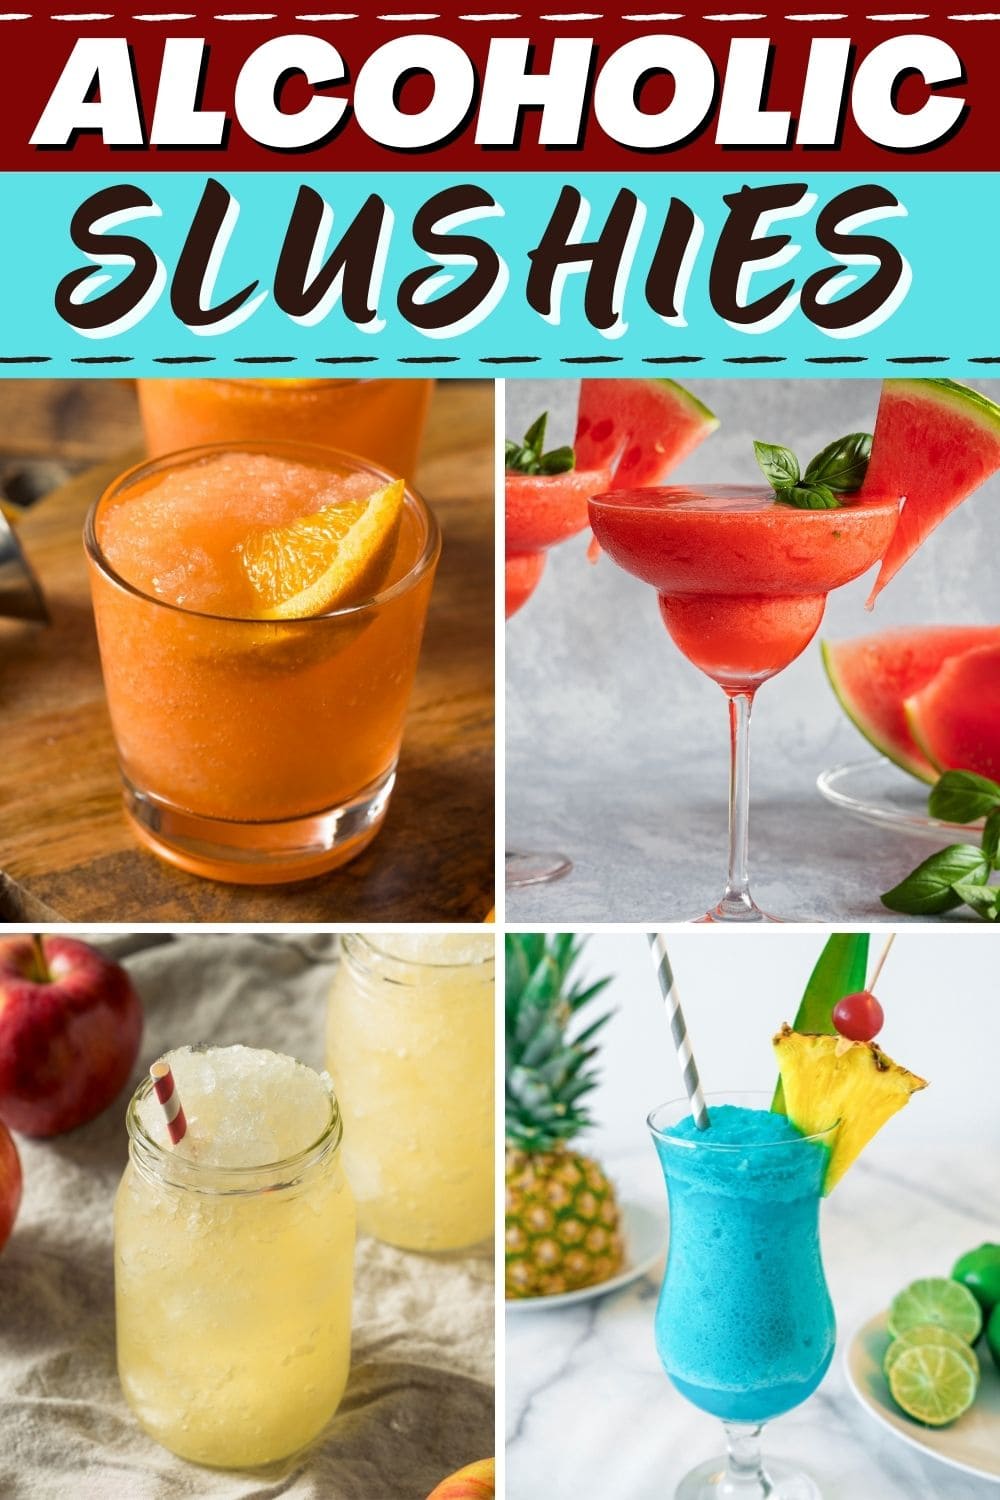 20 Easy Alcoholic Slushies For Summer Parties Insanely Good 8970